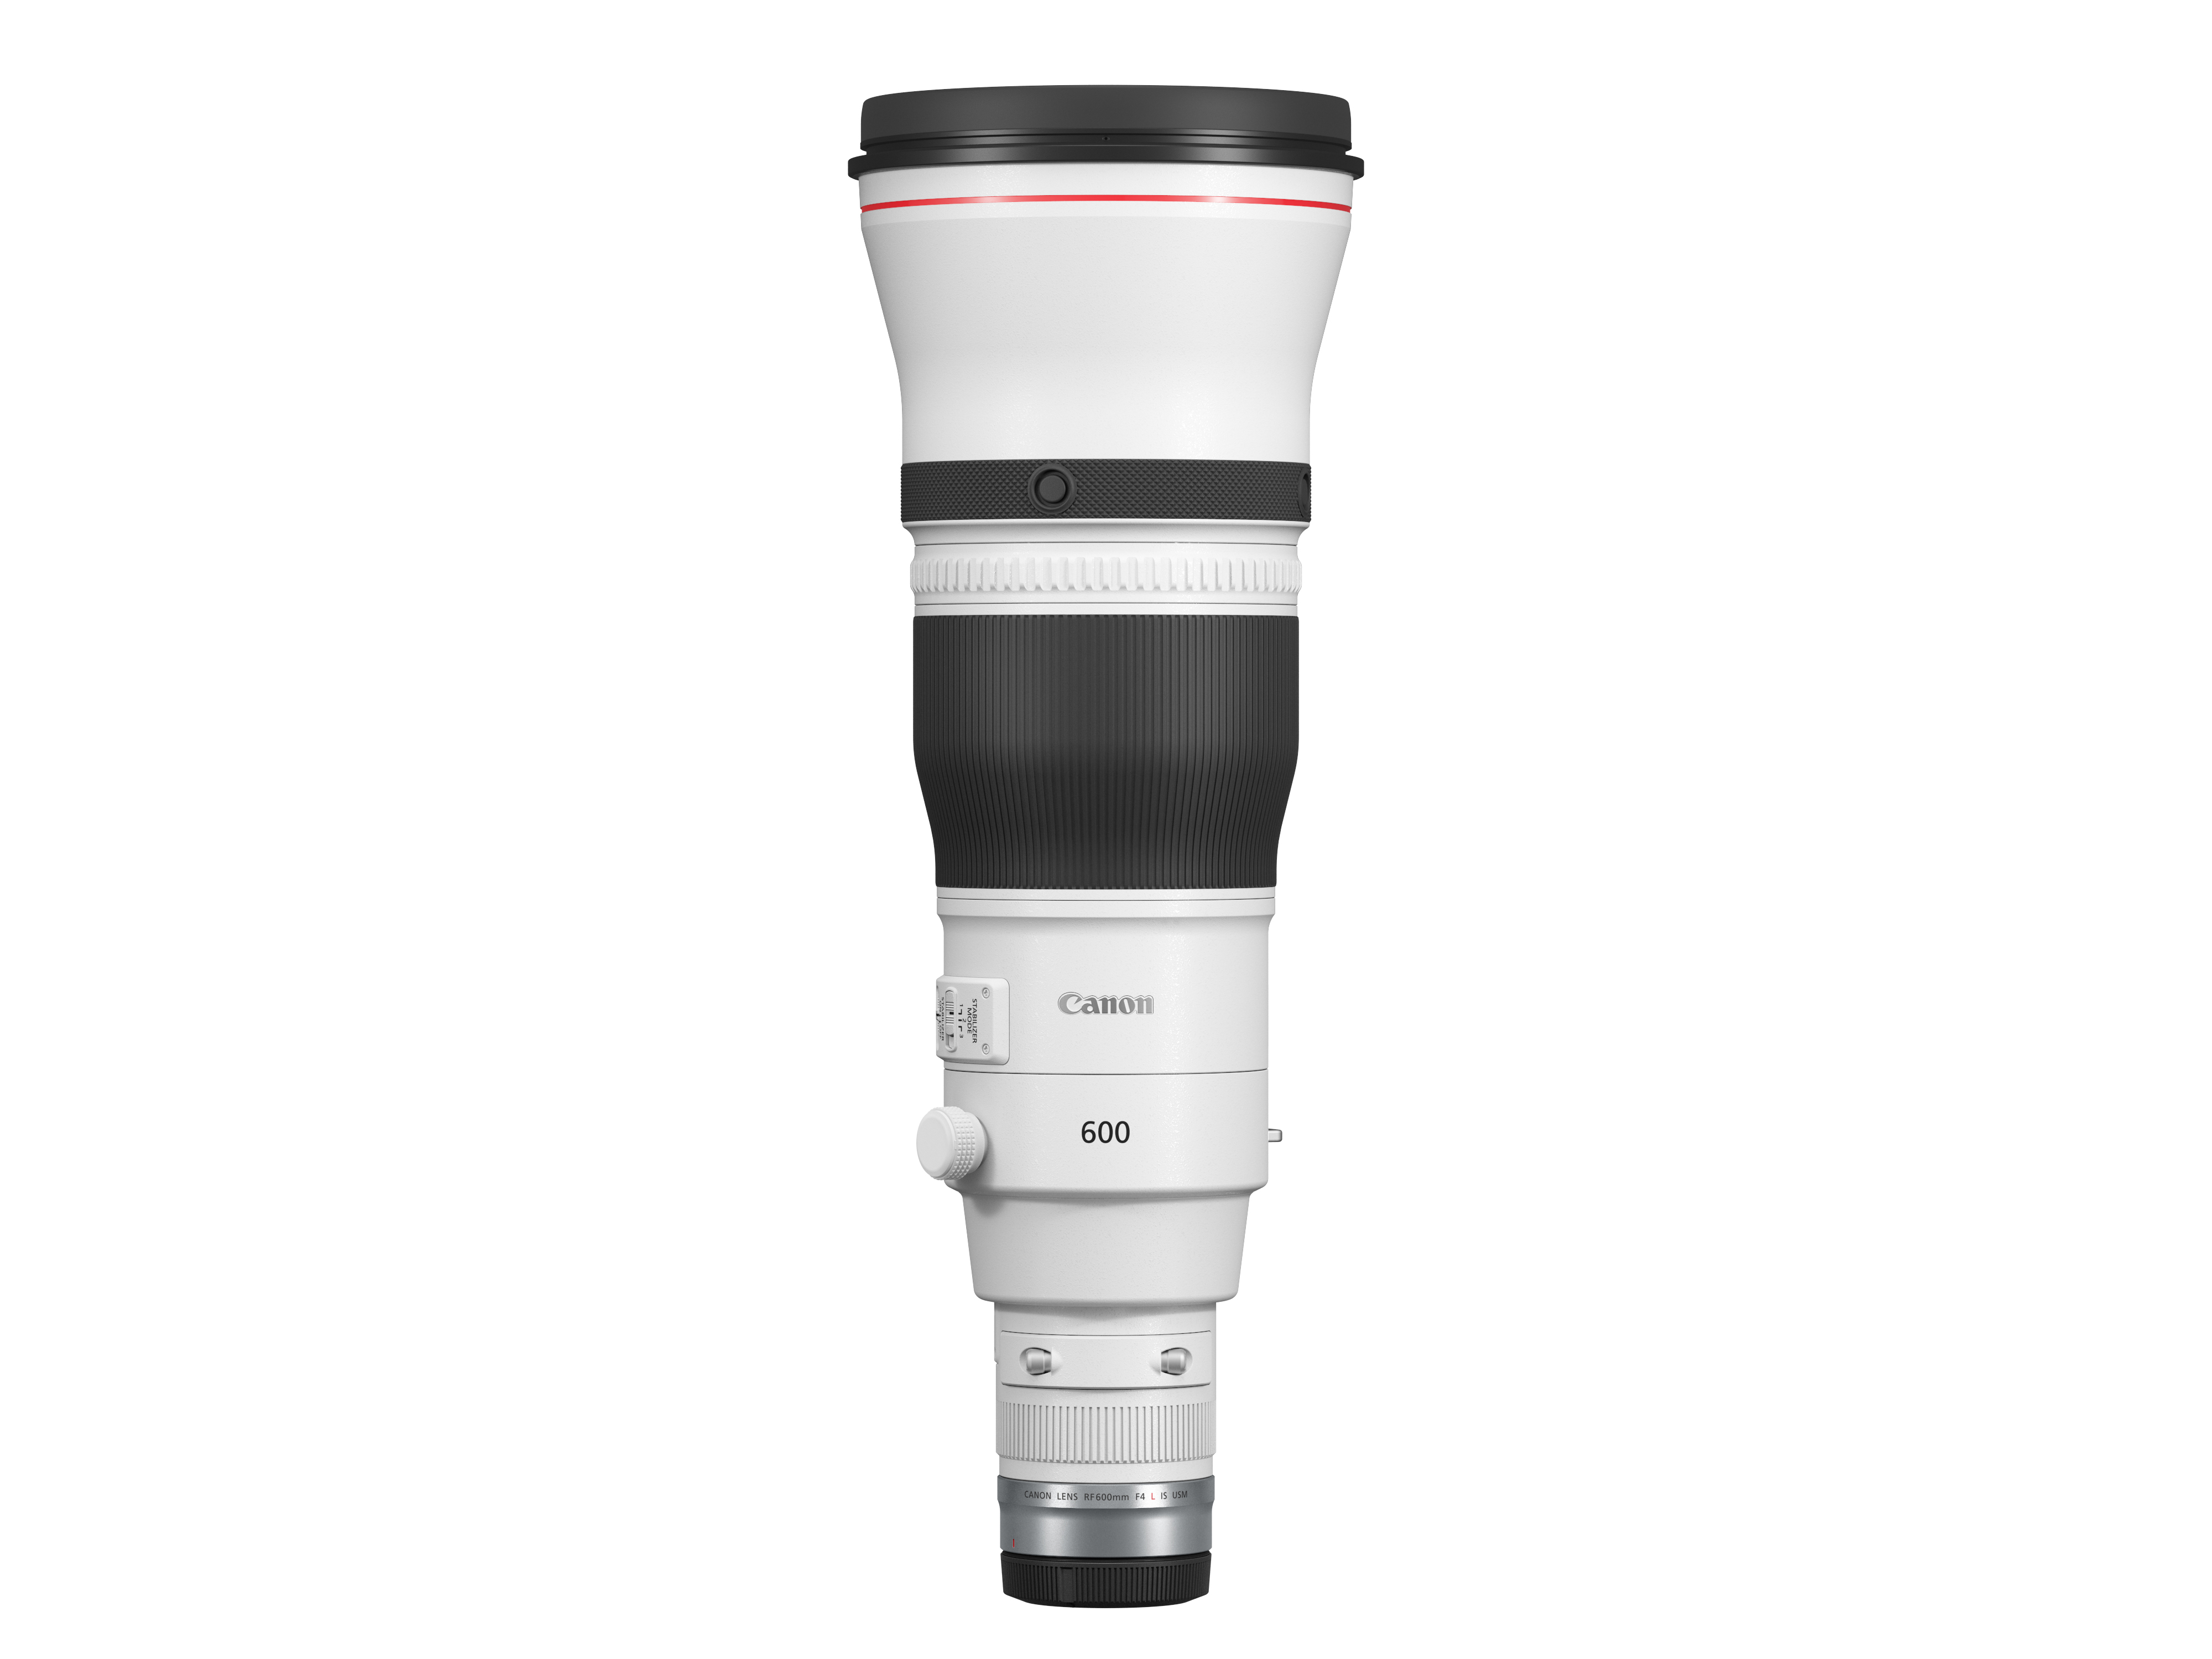 Canon RF 600mm f/4L IS USM lens